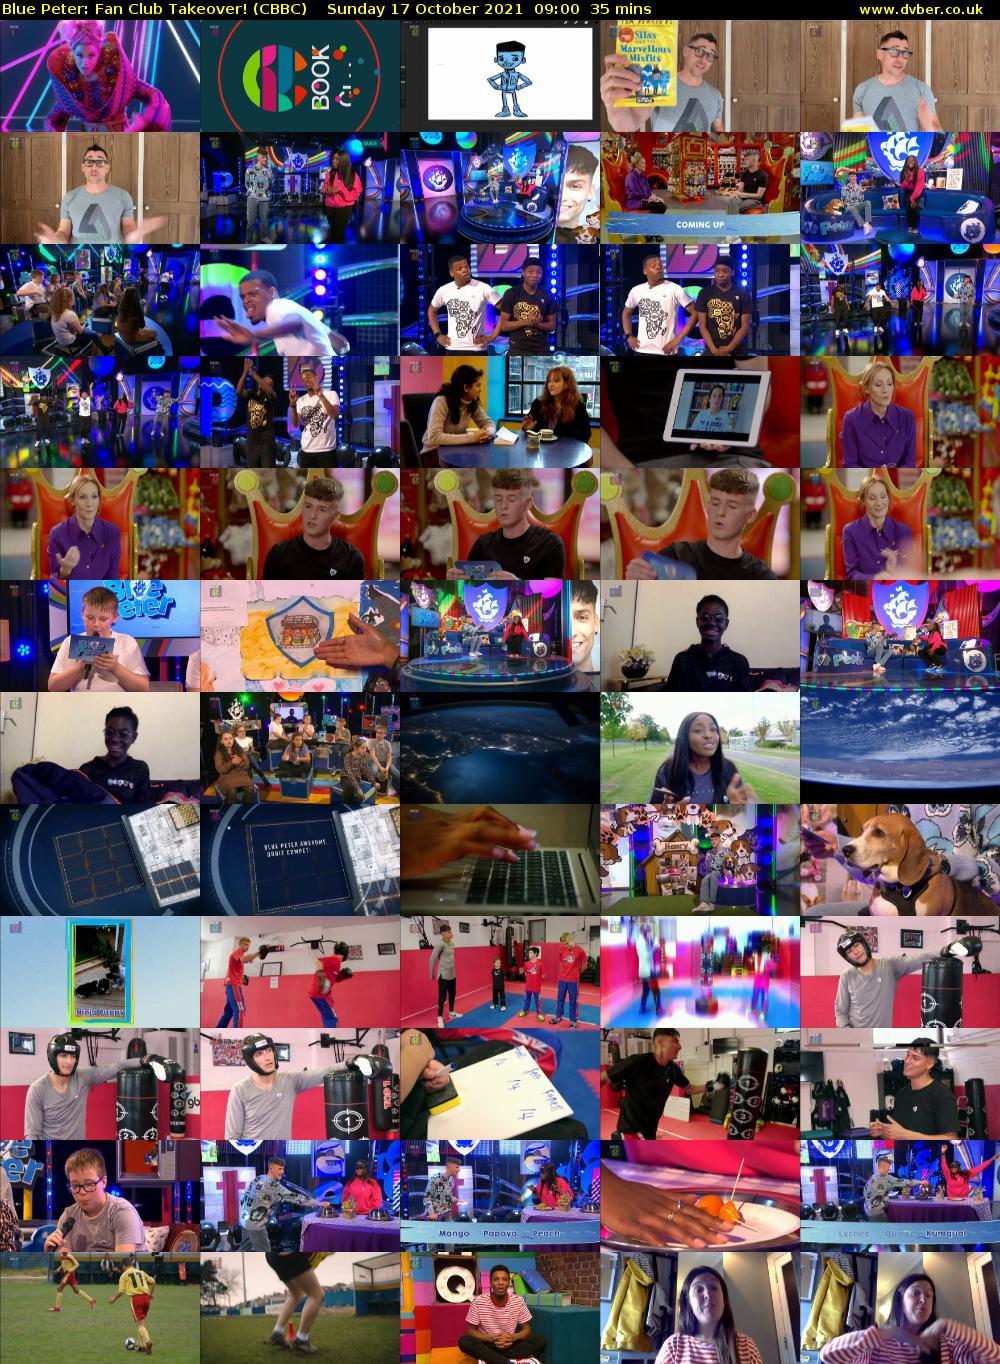 Blue Peter: Fan Club Takeover! (CBBC) Sunday 17 October 2021 09:00 - 09:35